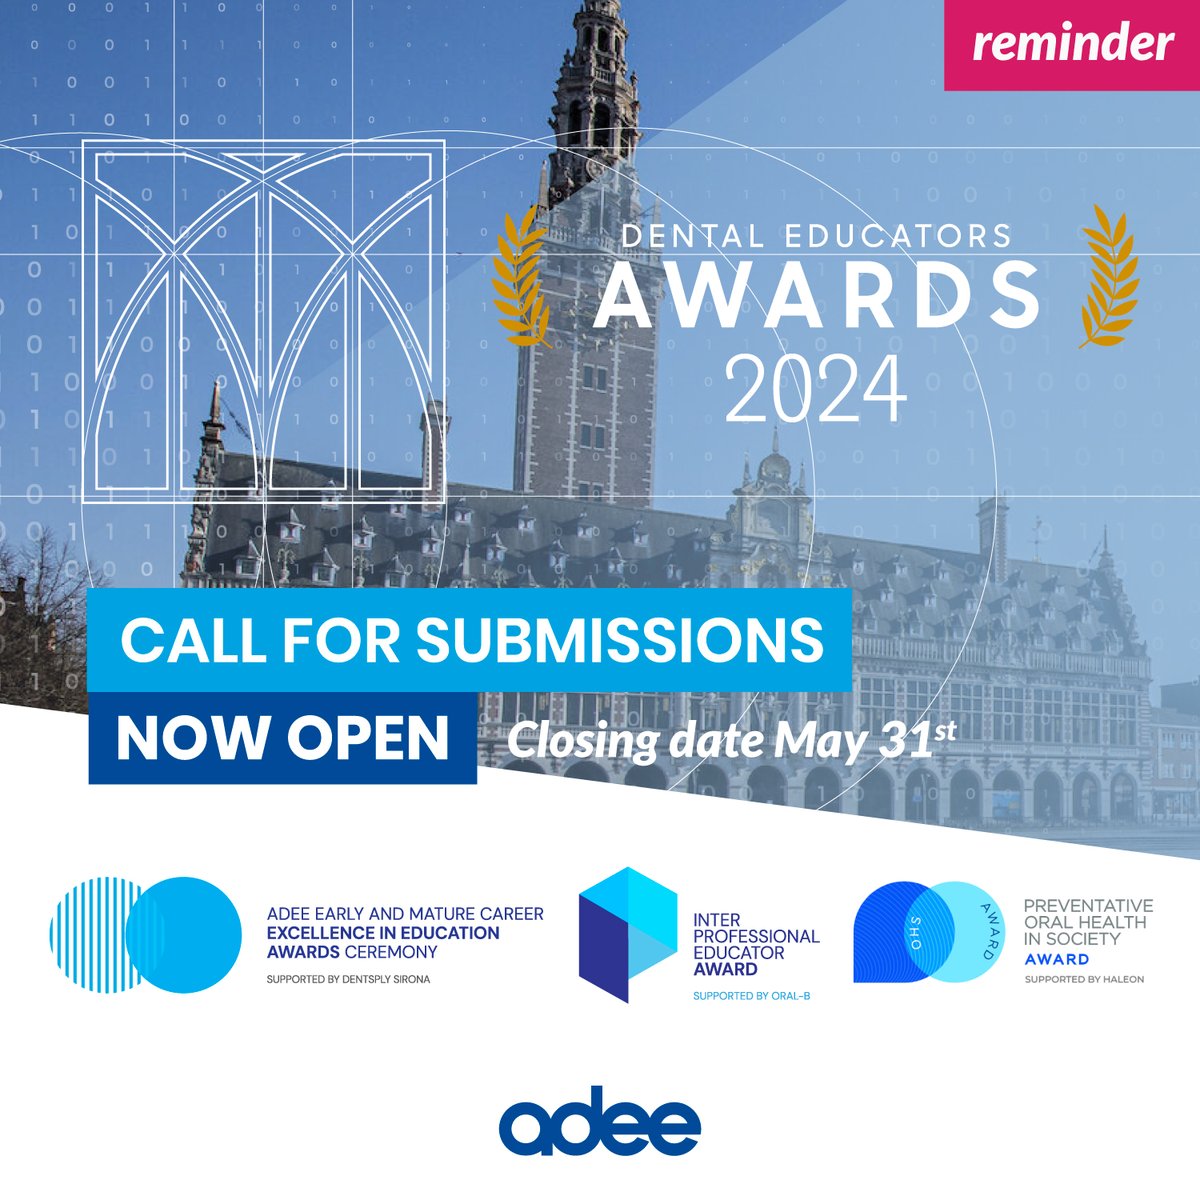 Apply for the 2024 ADEE Dental & Intra-Professional Educator Awards! Foster academic careers in oral health education. More info: adee.org/activities/exc… #Adee #Leuven2024 #AdeeAnnualMeeting #callforsubmissions #oralhealth #dentaleducation #dentistry